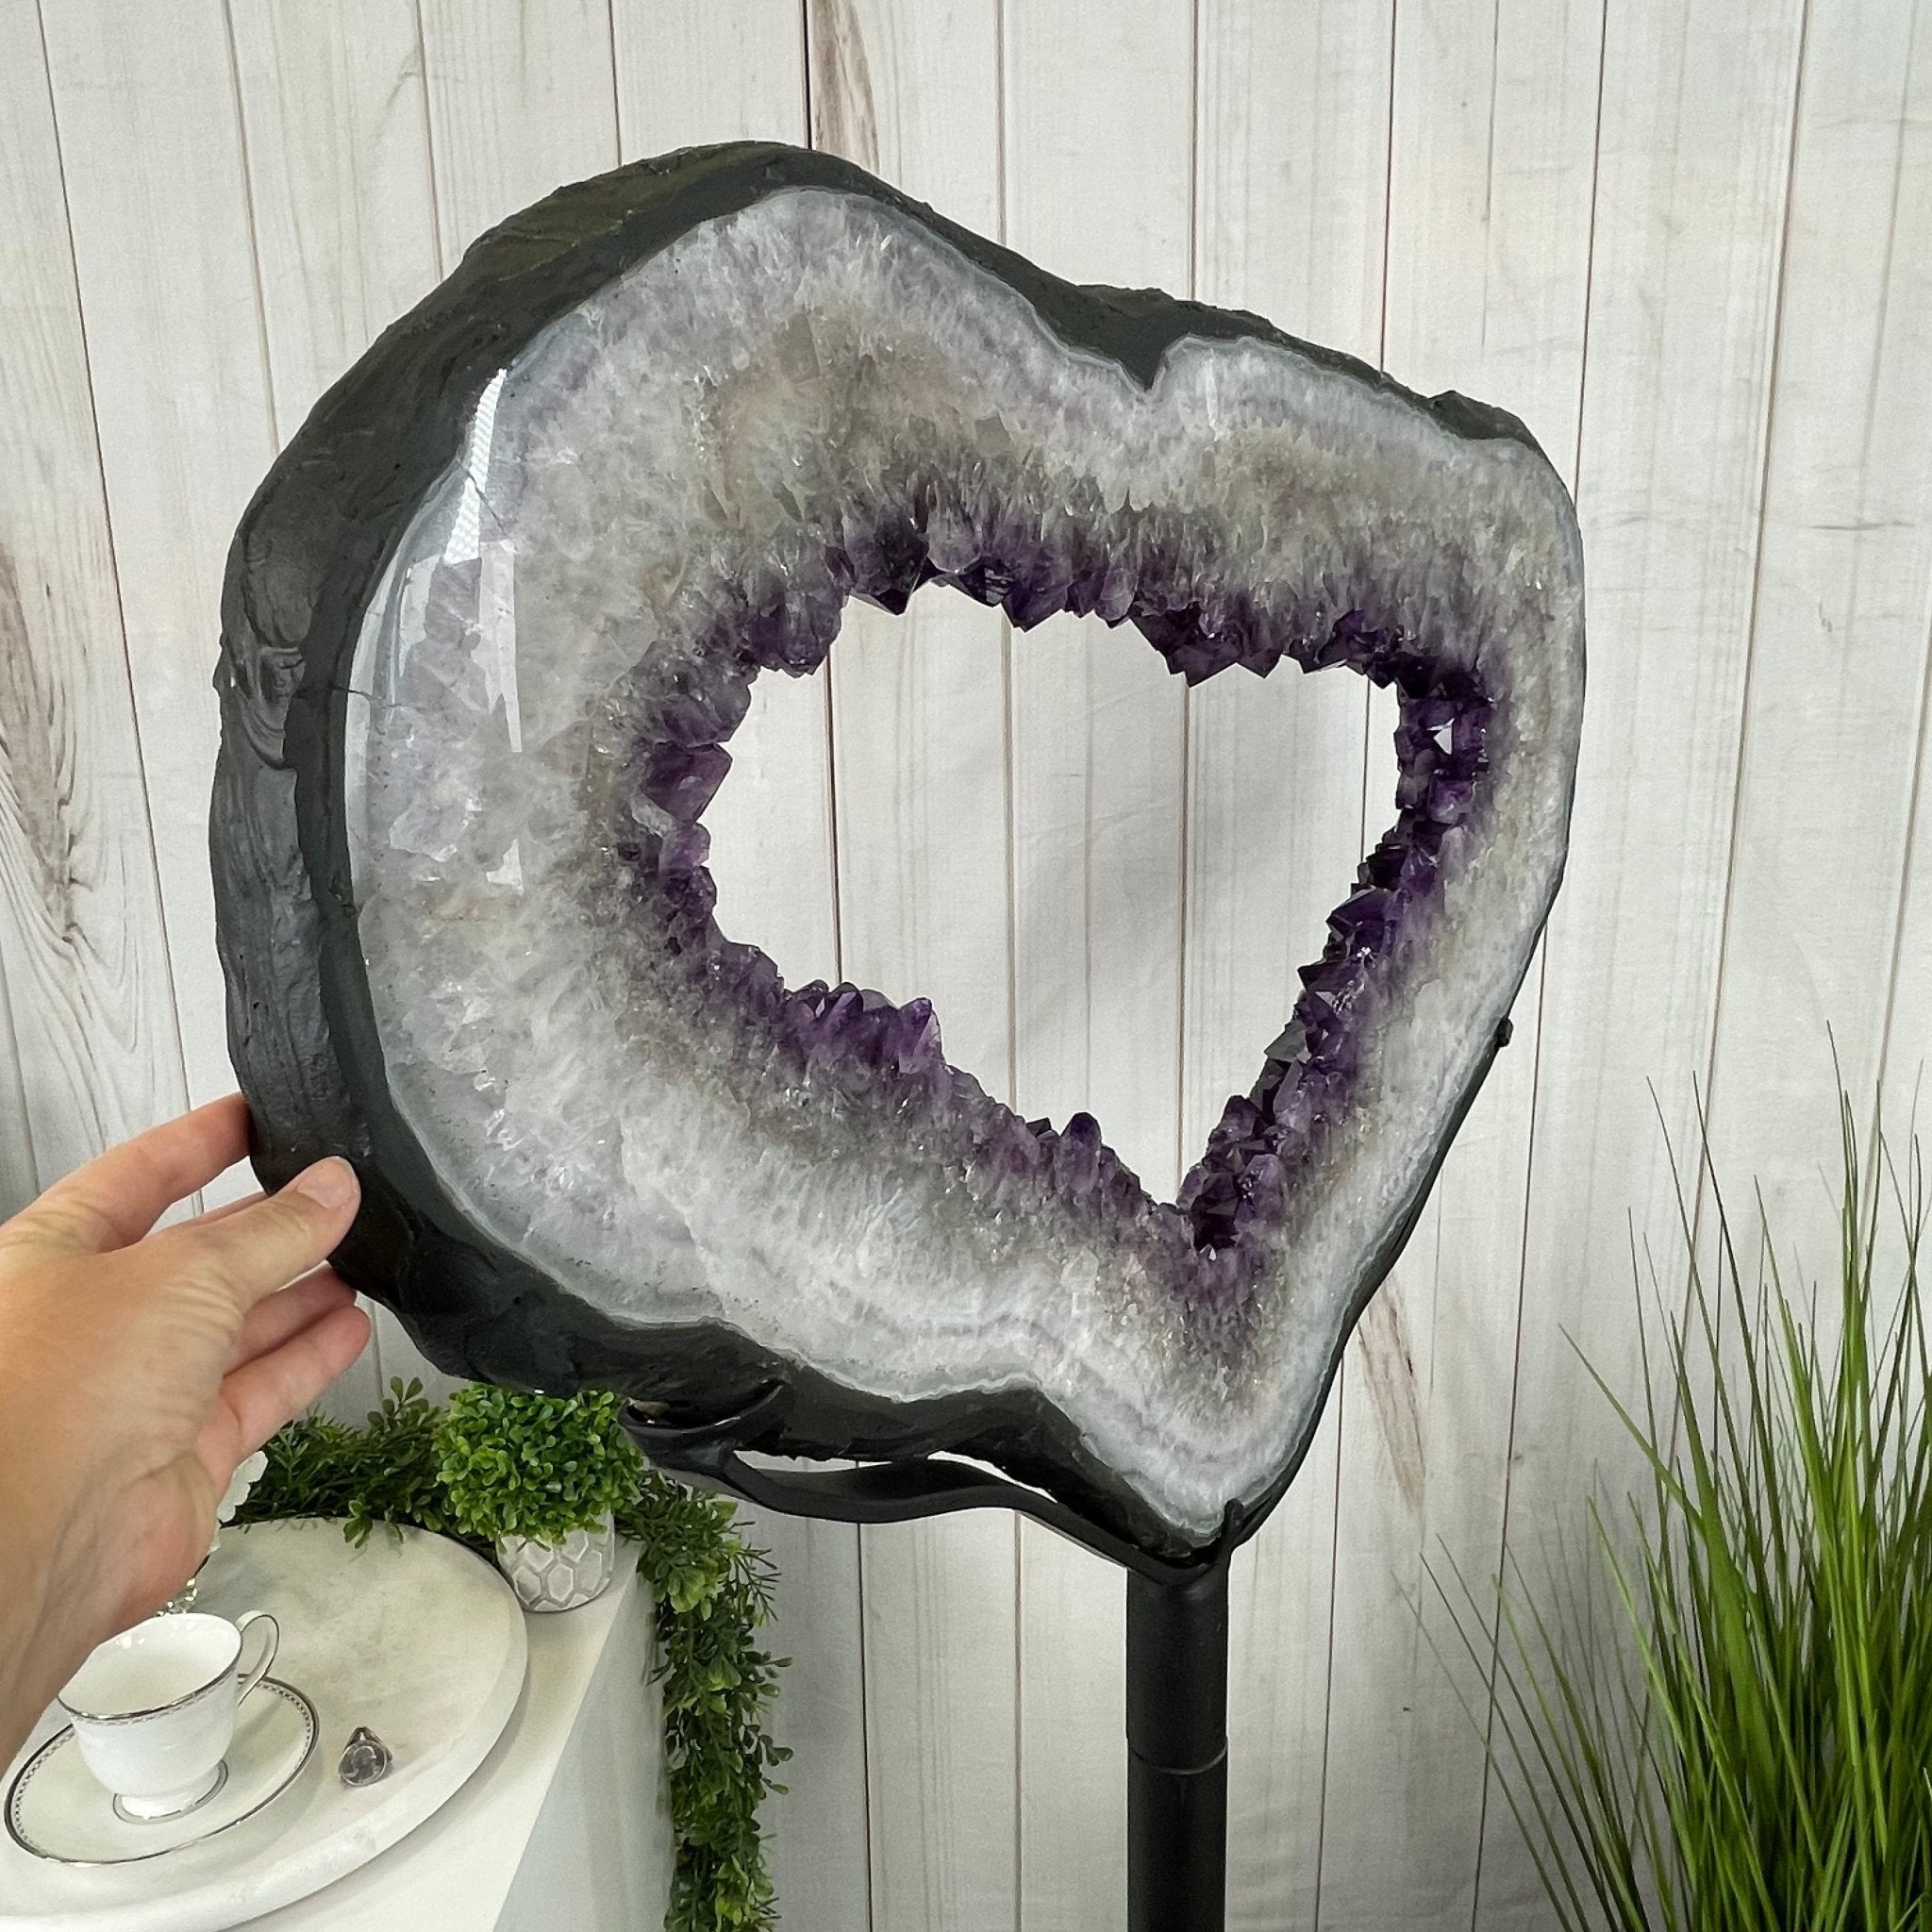 Super Quality Brazilian Amethyst Crystal Portal on a Tall Rotating Stand, 71.8 lbs & 61.75" tall Model #5604-0107 by Brazil Gems - Brazil GemsBrazil GemsSuper Quality Brazilian Amethyst Crystal Portal on a Tall Rotating Stand, 71.8 lbs & 61.75" tall Model #5604-0107 by Brazil GemsPortals on Rotating Bases5604-0107